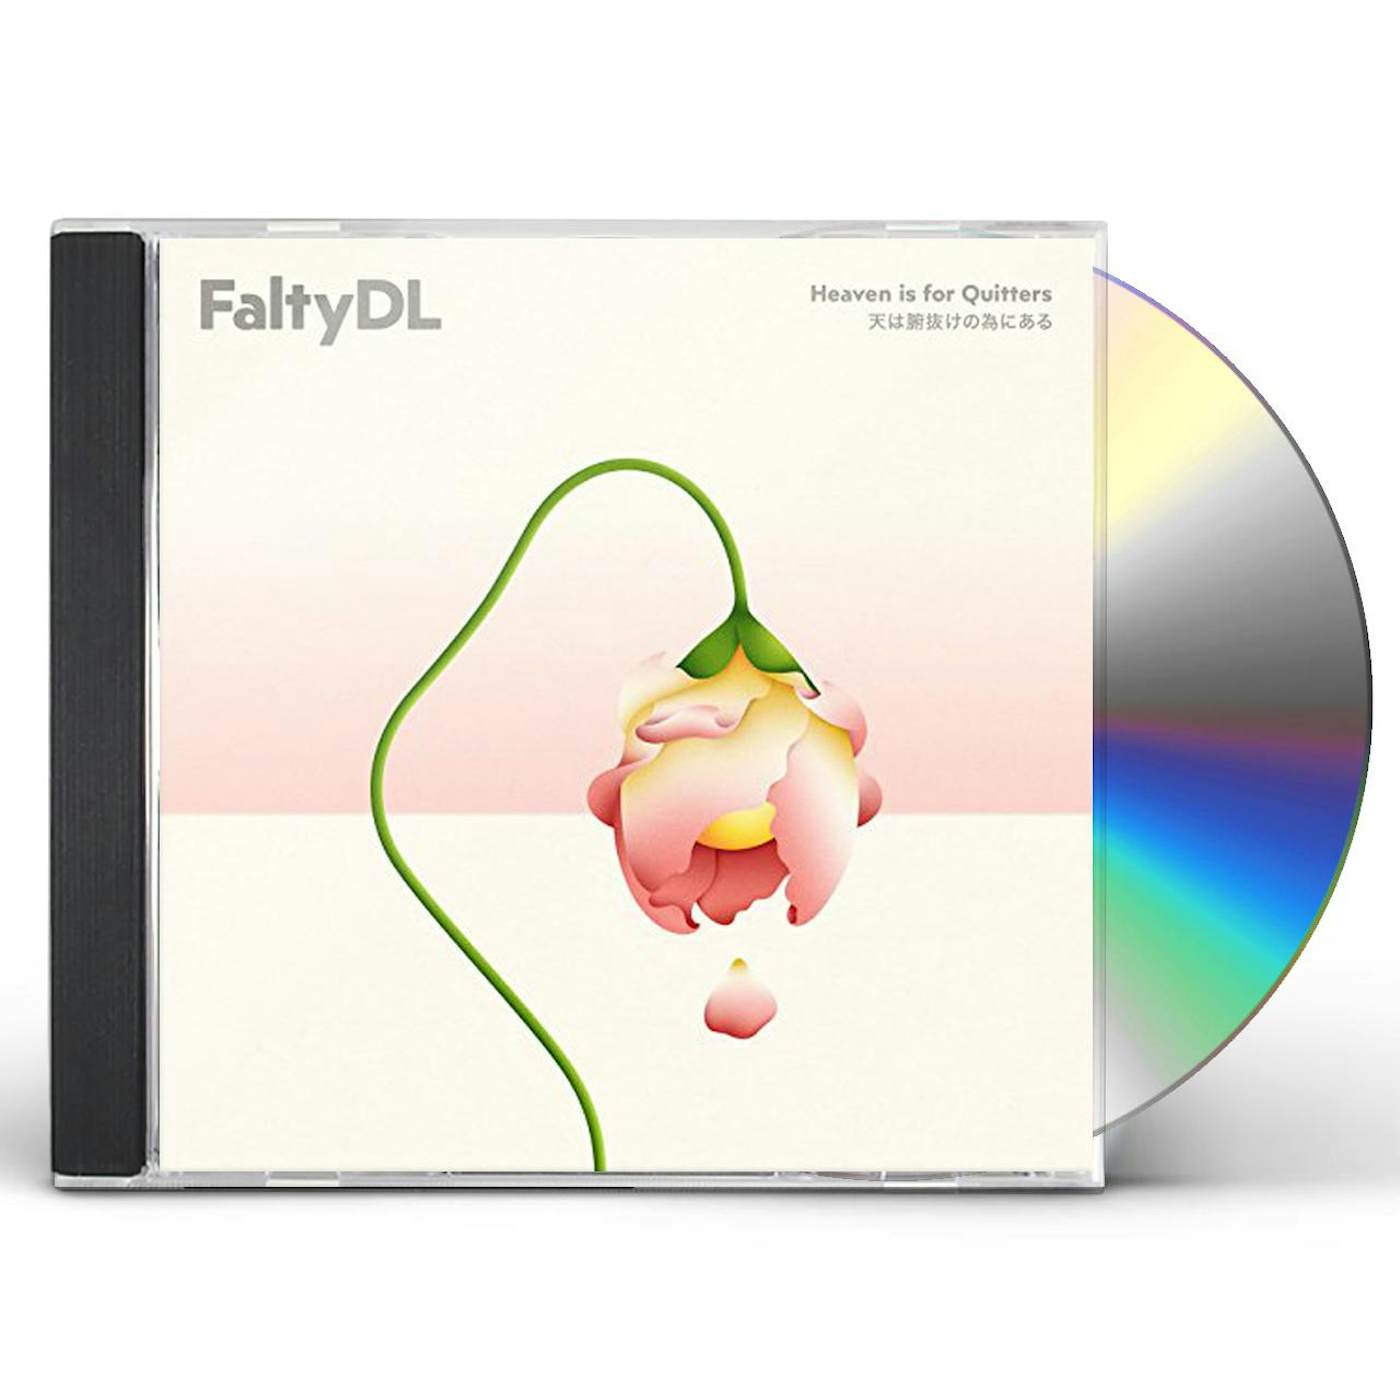 FaltyDL HEAVEN IS FOR QUITTERS CD